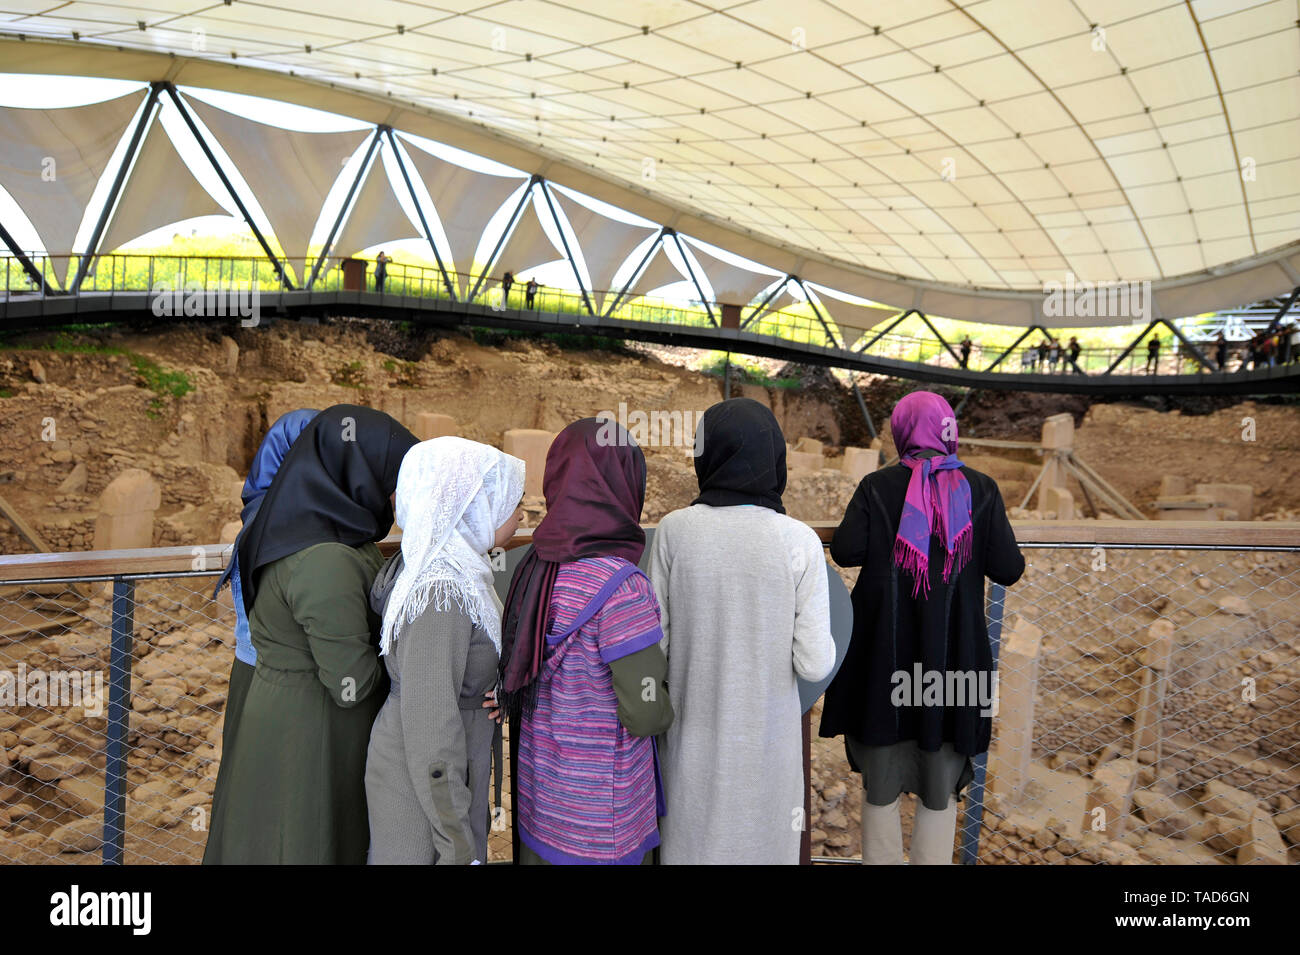 A group of Muslim women survey the view of the archaeological excavation of an ancient stone ceremonial site at Gobekli Tepe in Sanliurfa, Turkey Stock Photo